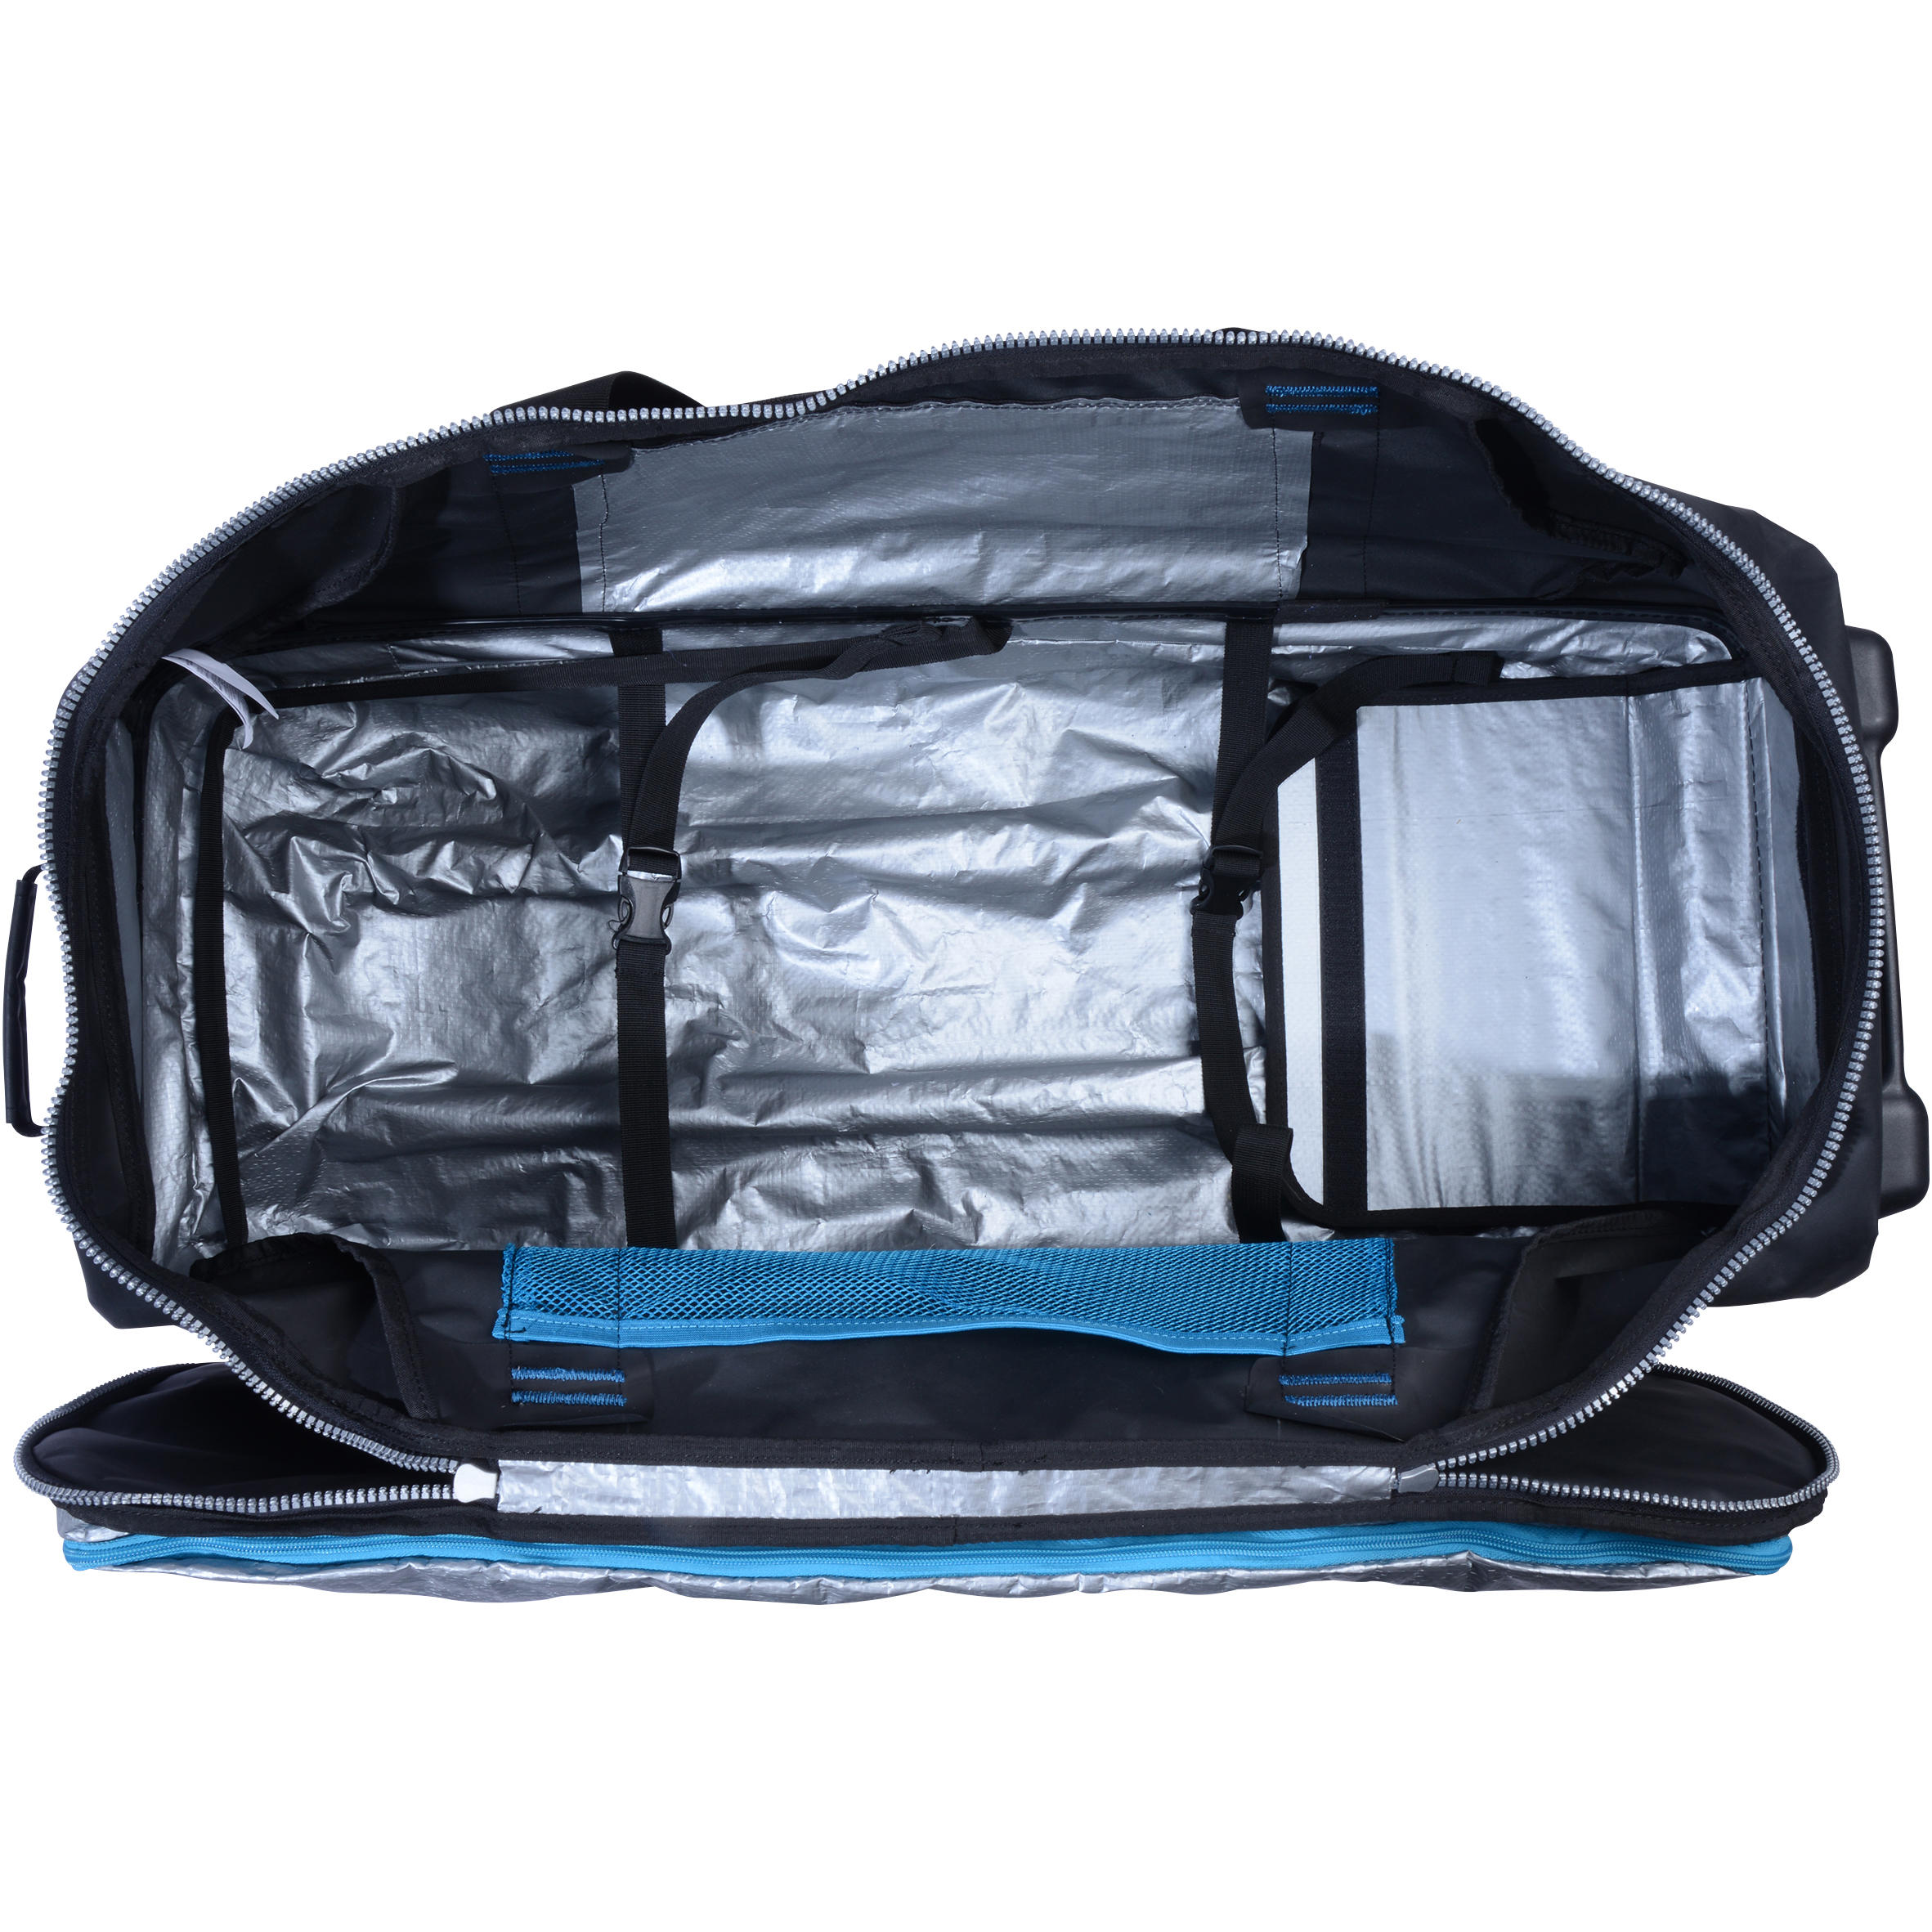 Scuba-diving travel bag 90 L with rigid shell and wheels - black/blue 18/21